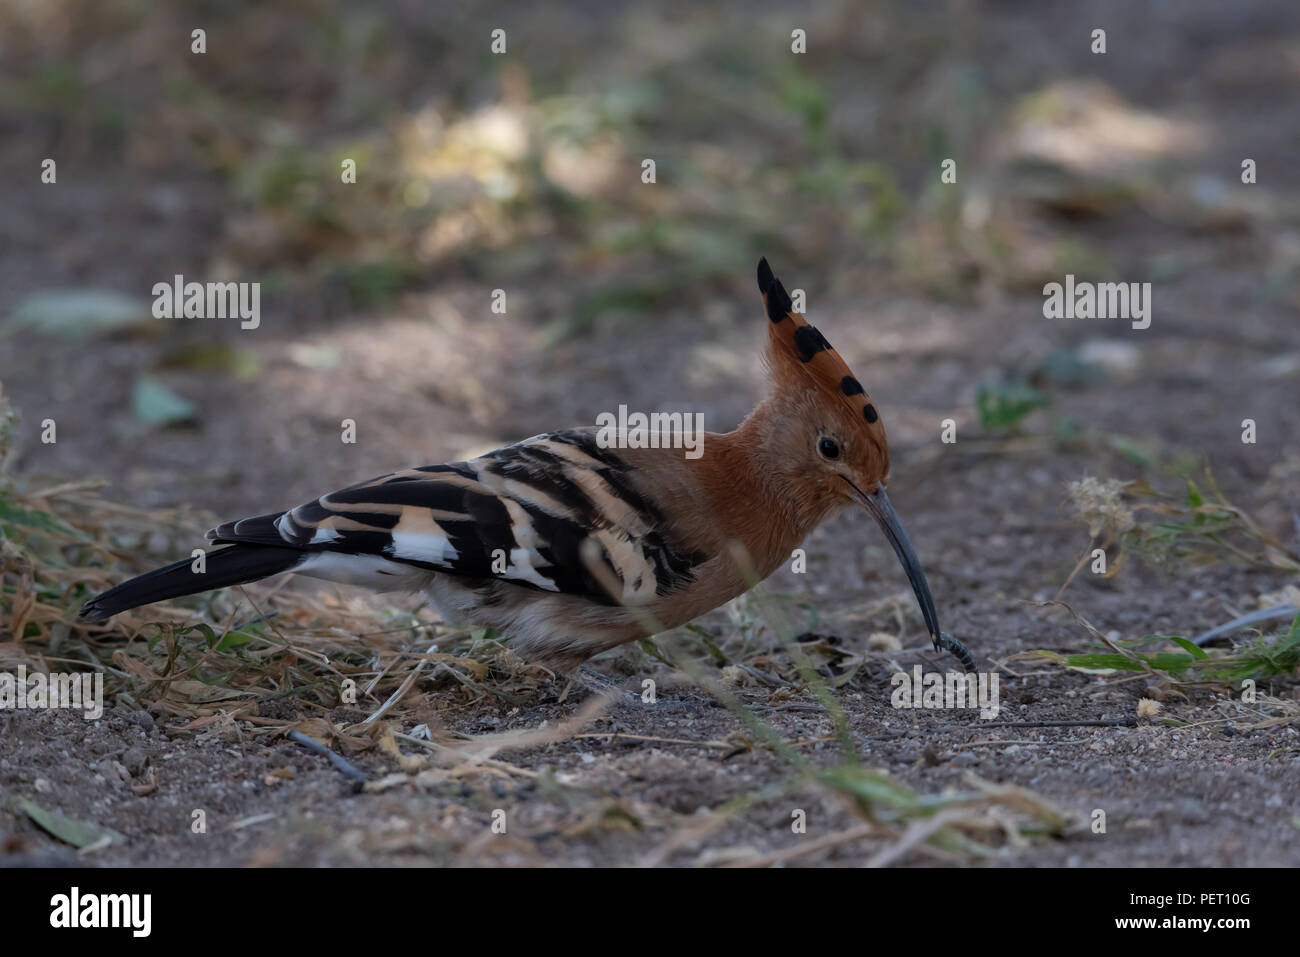 Successful Hoepoe foraging on ground with insect in beak Stock Photo